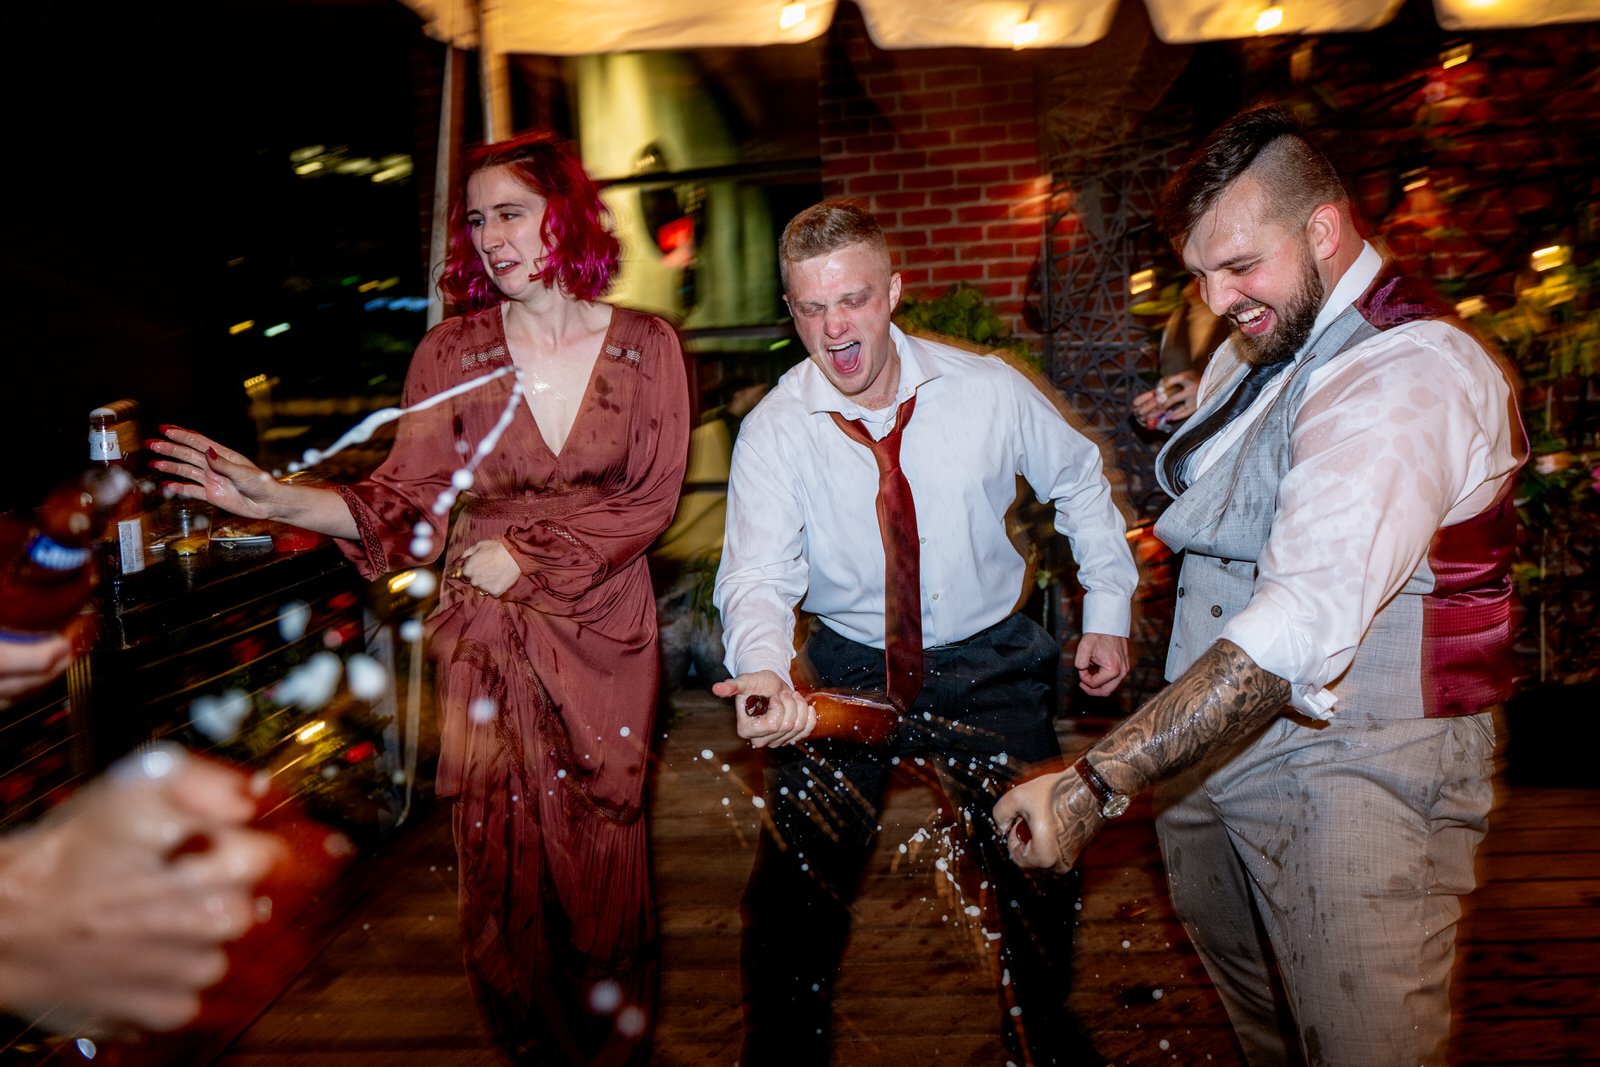 Ampersea_Baltimore_Maryland_Wedding_Suzanne&Andrew_Dance_Party-6829.jpg